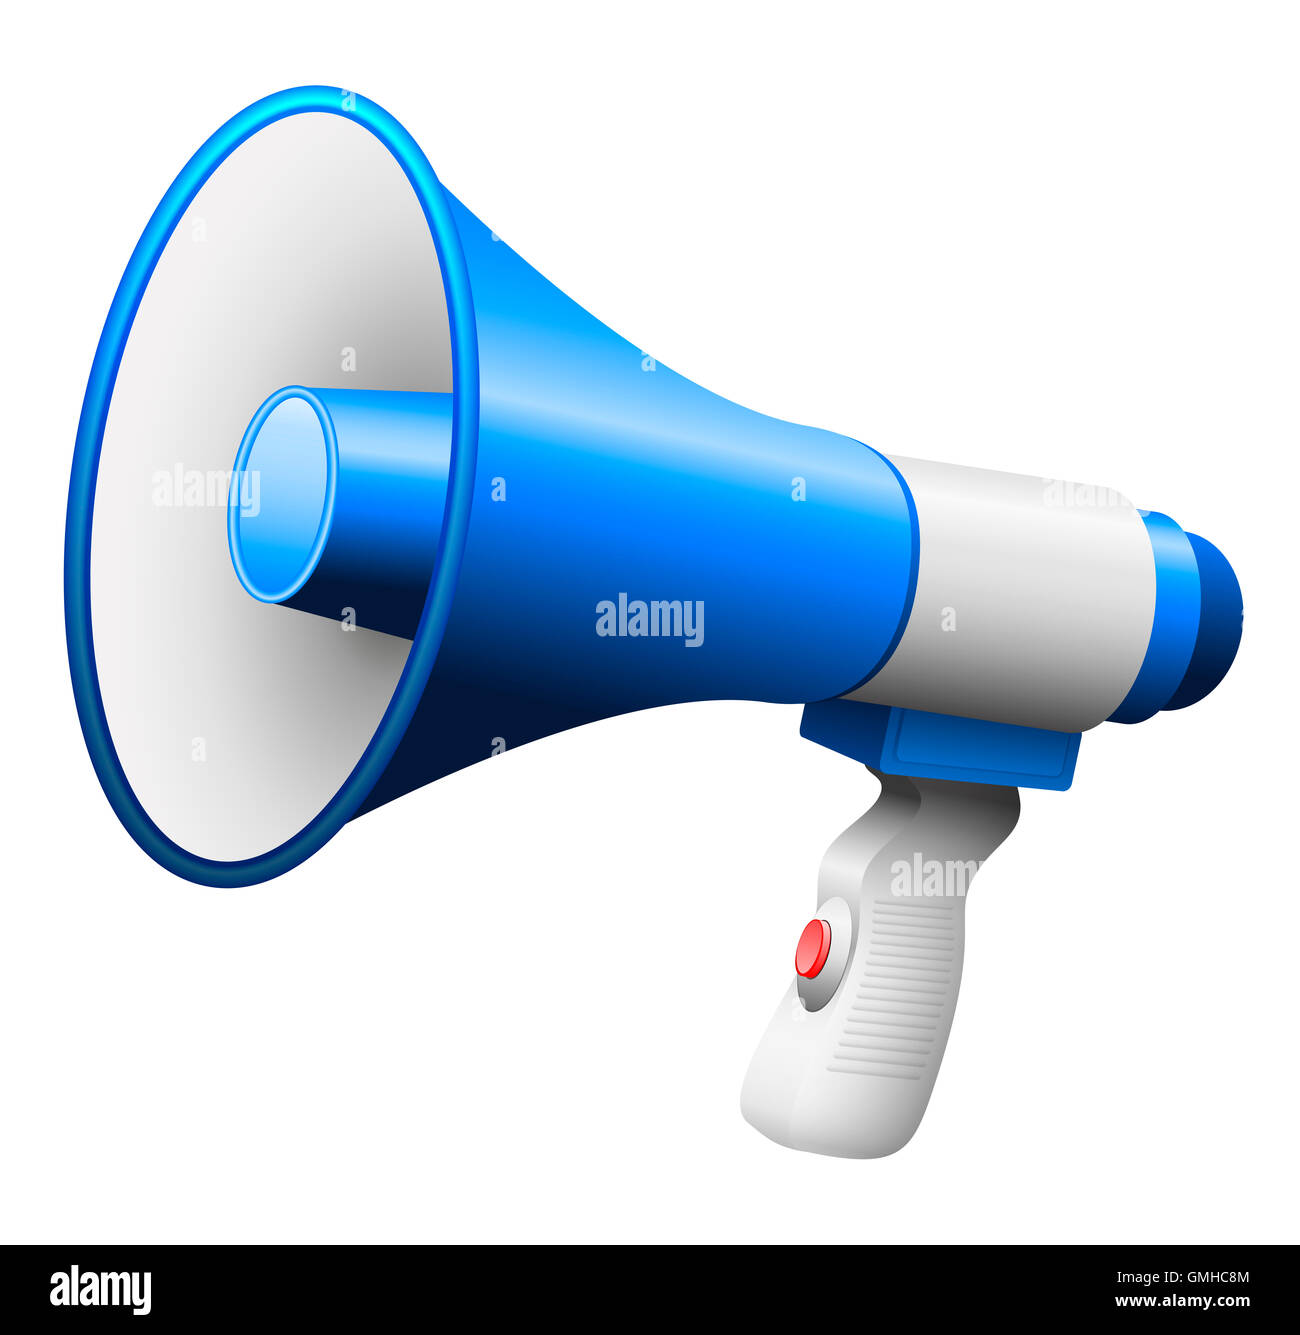 Megaphone or bullhorn with handle and button. Stock Photo